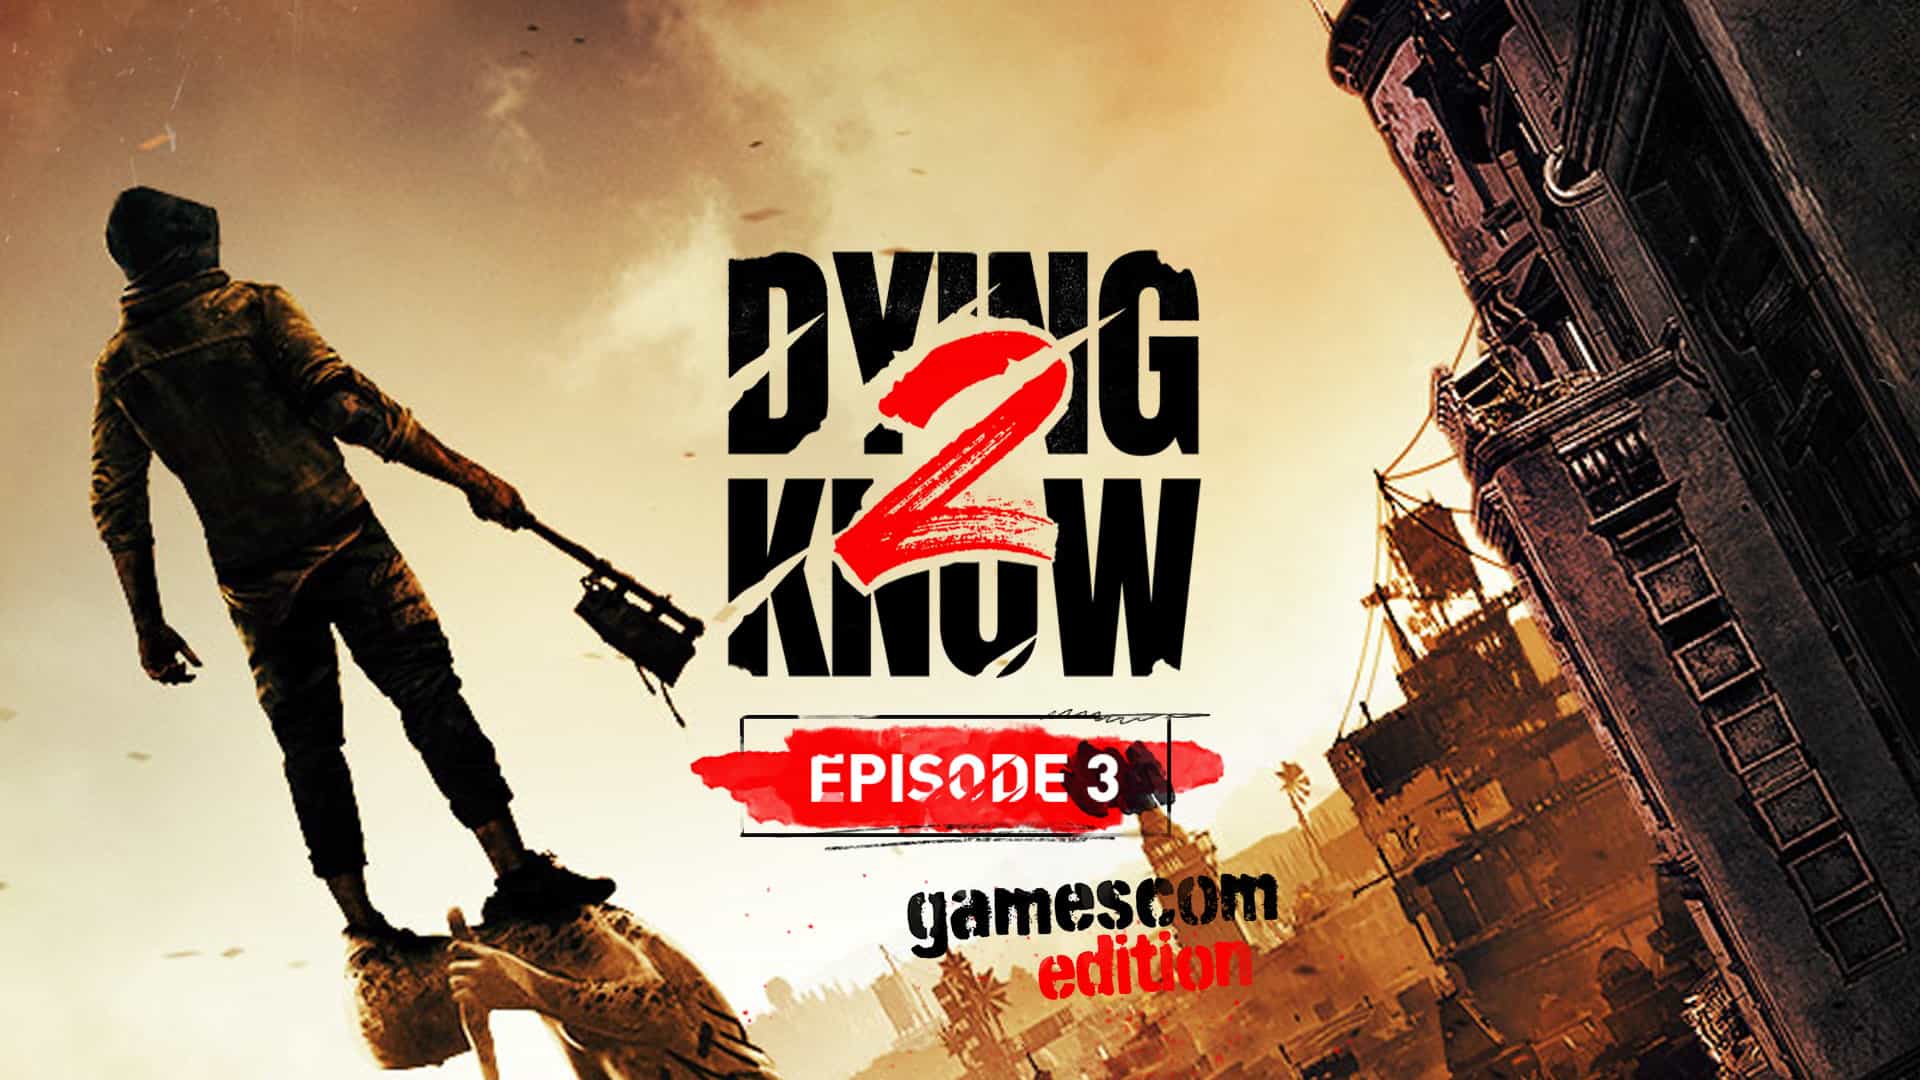 Dying Light 2 Stay Human promises next Dying 2 Know episode during Gamescom